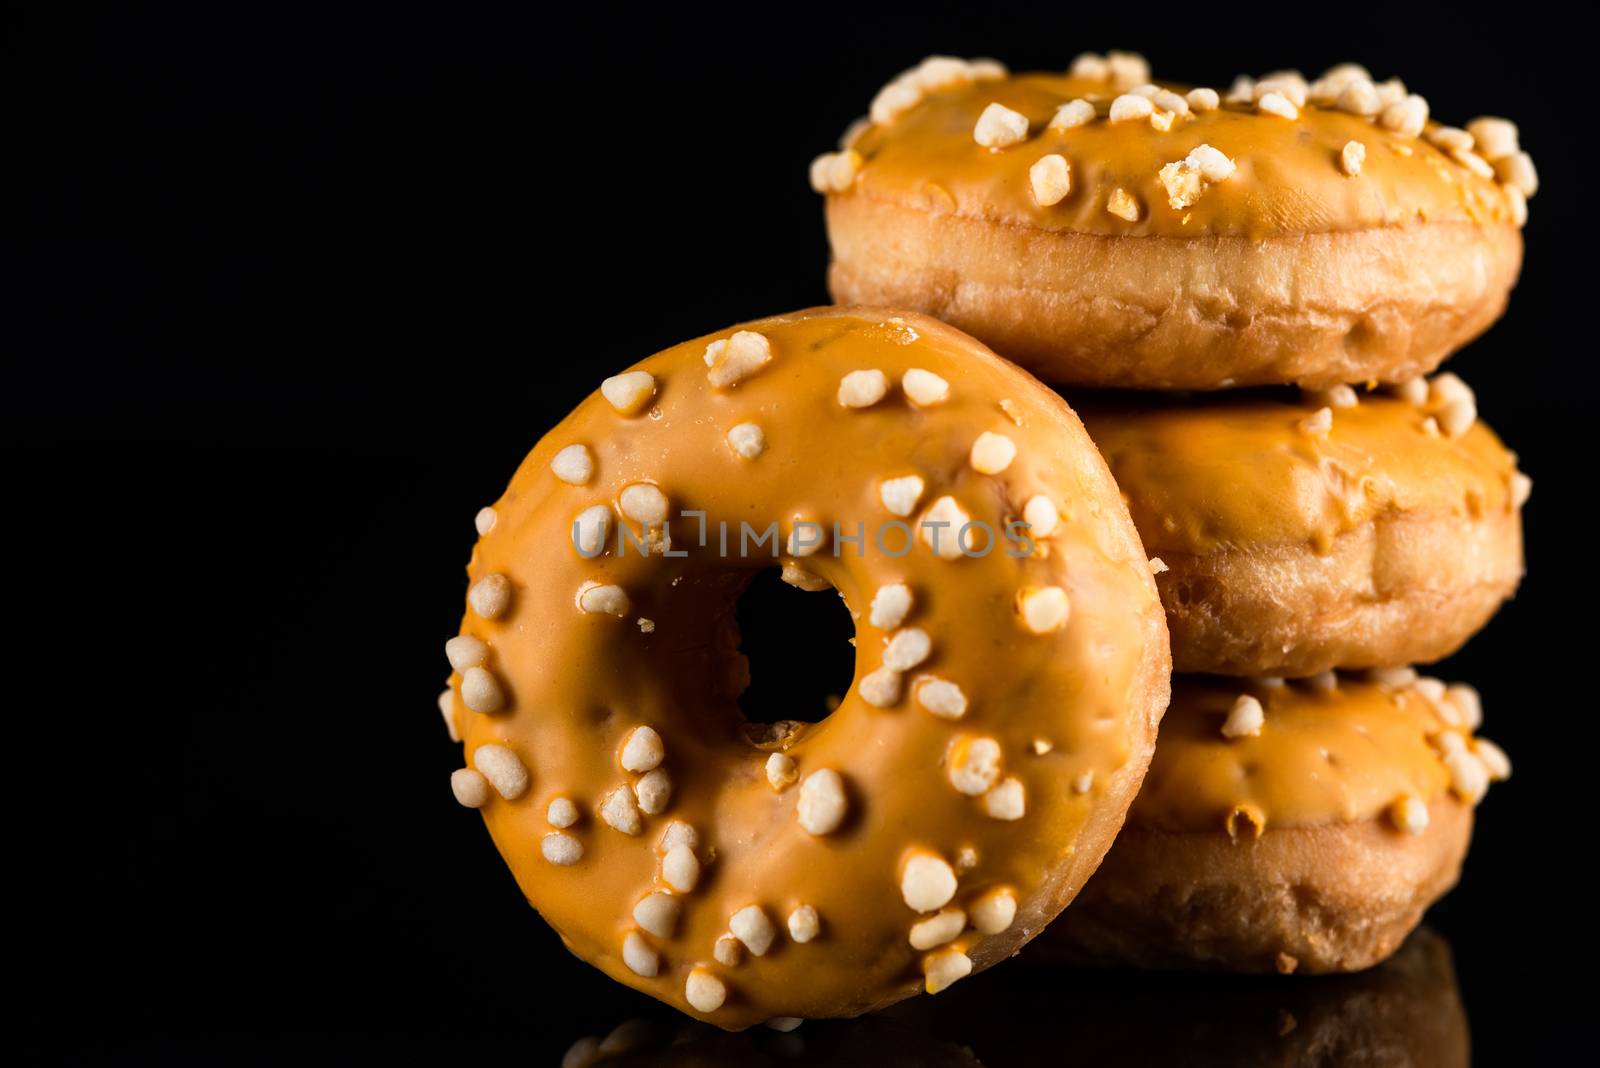 Stack of  Salted Caramel Donuts or Doughnuts on Black Background by merc67